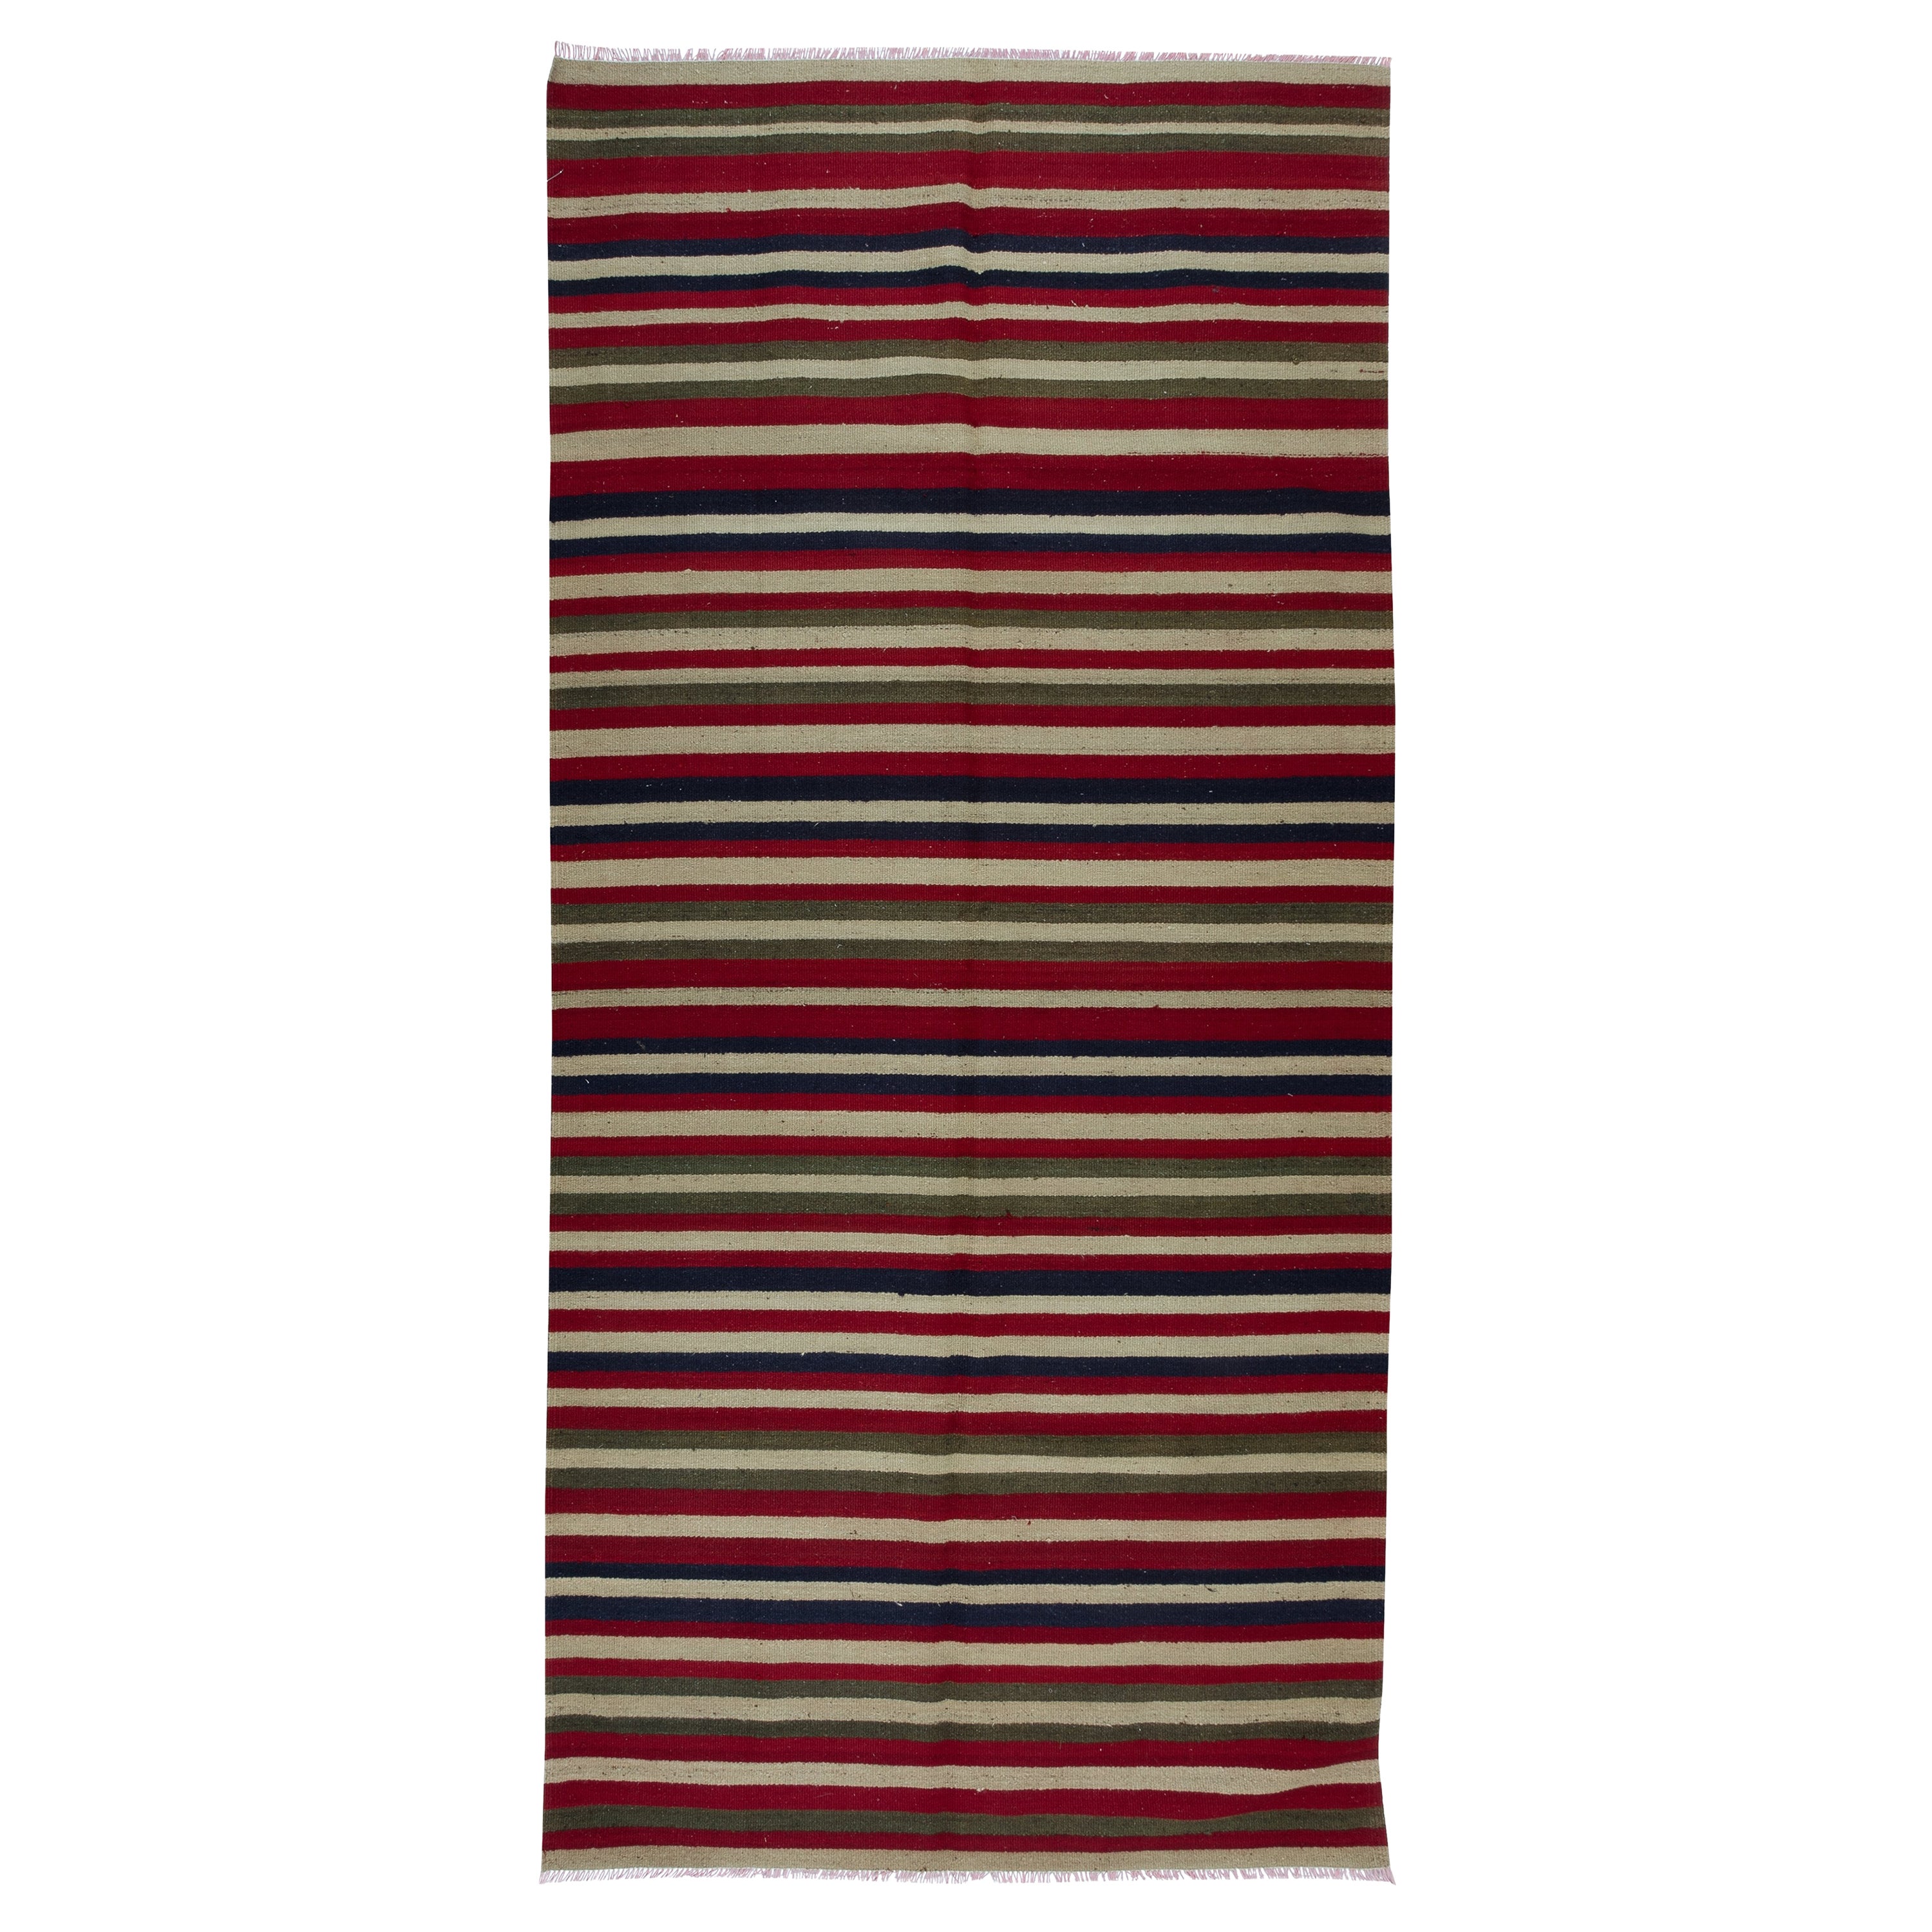 4.8x9.8 Ft Hand-Woven Vintage Turkish Kilim Rug with Colorful Stripes, 100% Wool For Sale